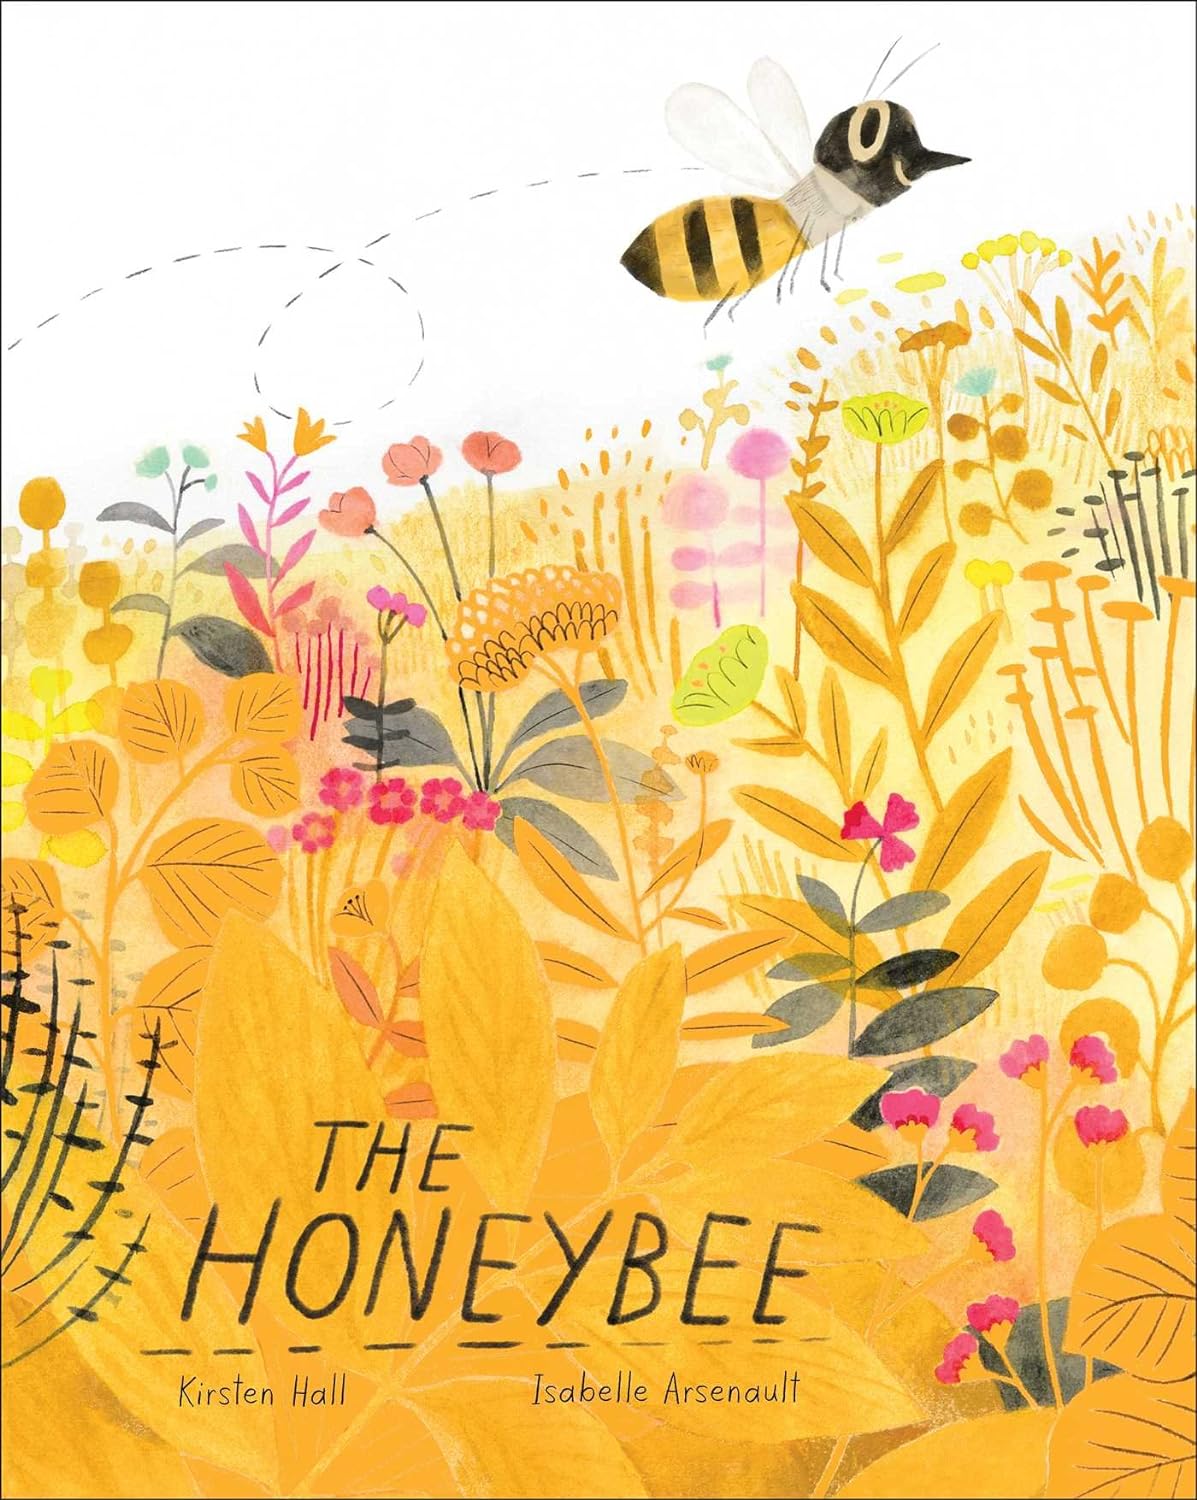 Atheneum Books for Young Readers 'The Honeybee' by Kirsten Hall, illustrated by Isabelle Arsenault